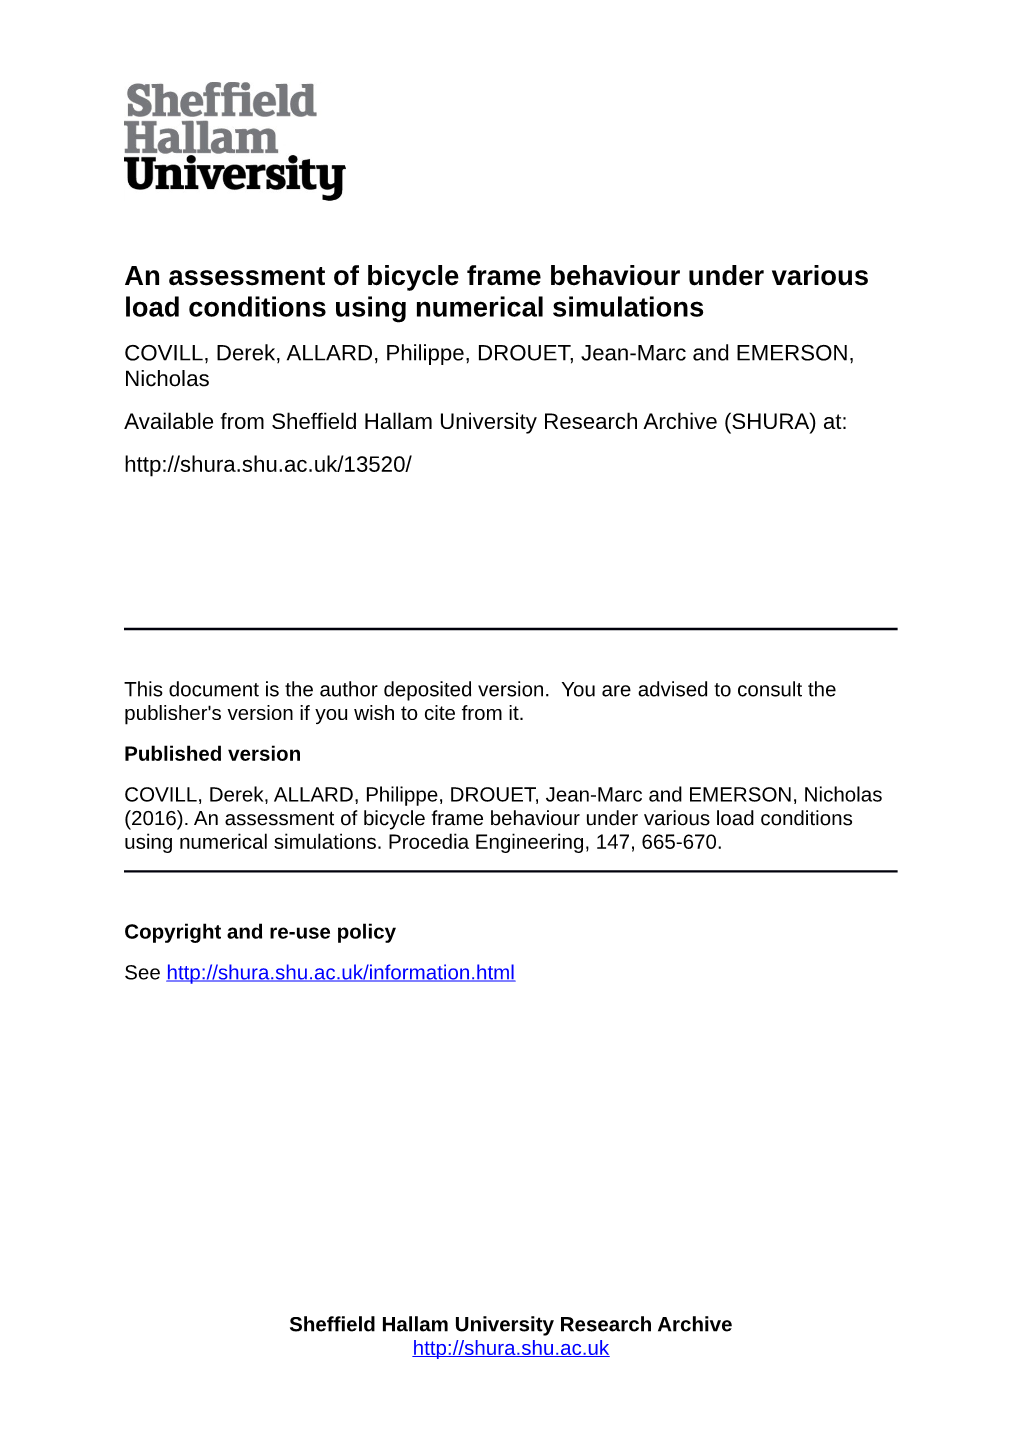 An Assessment of Bicycle Frame Behaviour Under Various Load